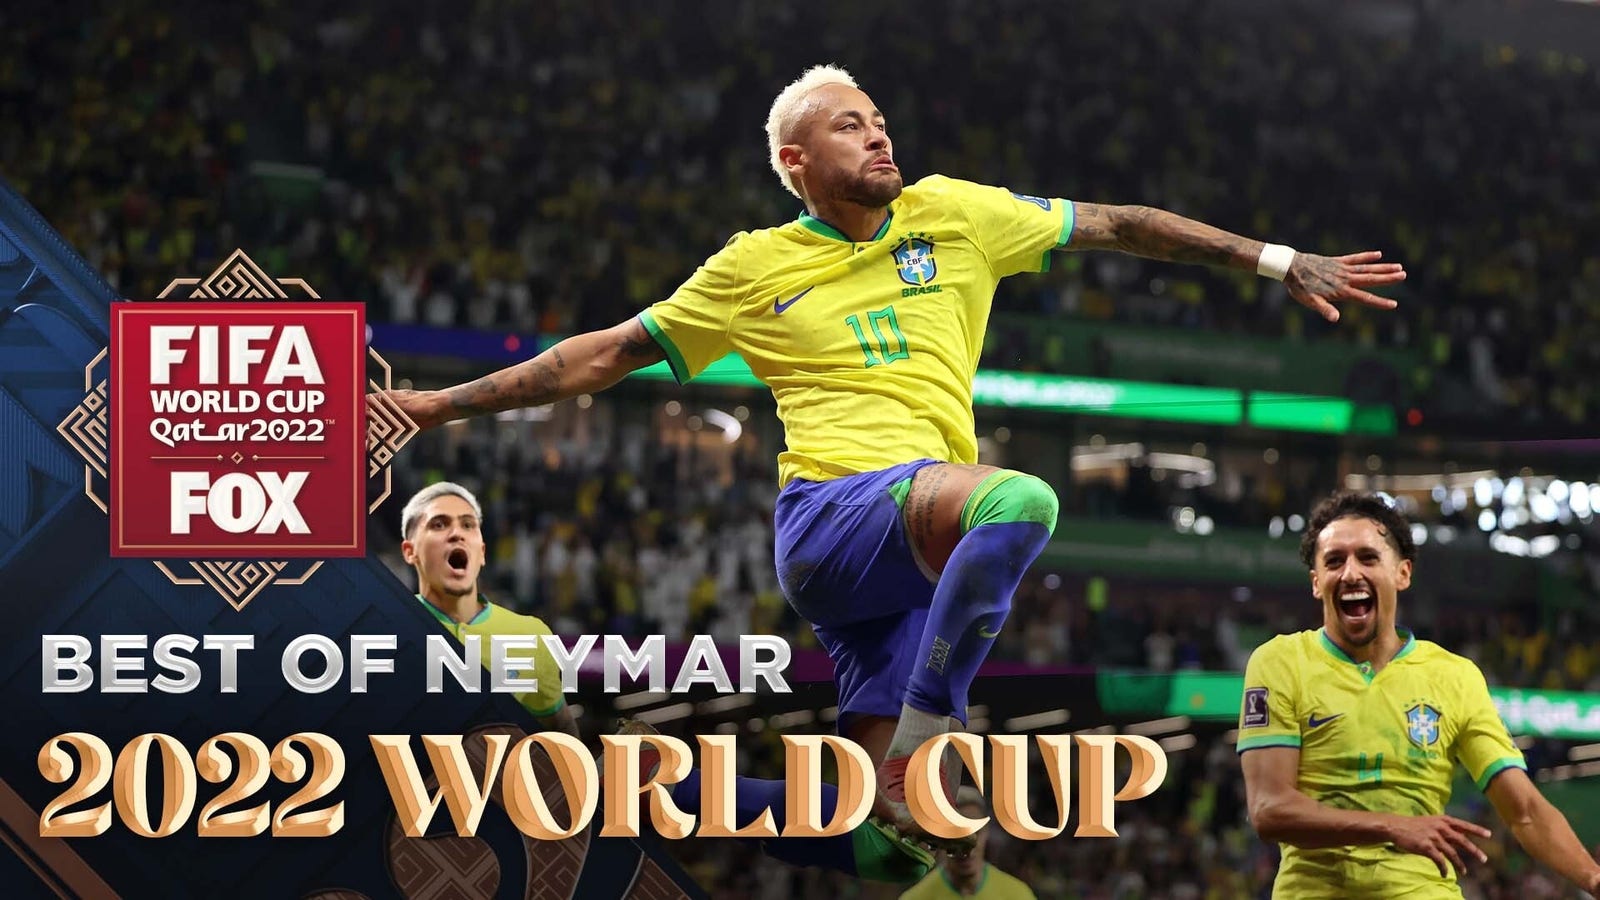 Neymar's BEST moments in the 2022 FIFA World Cup